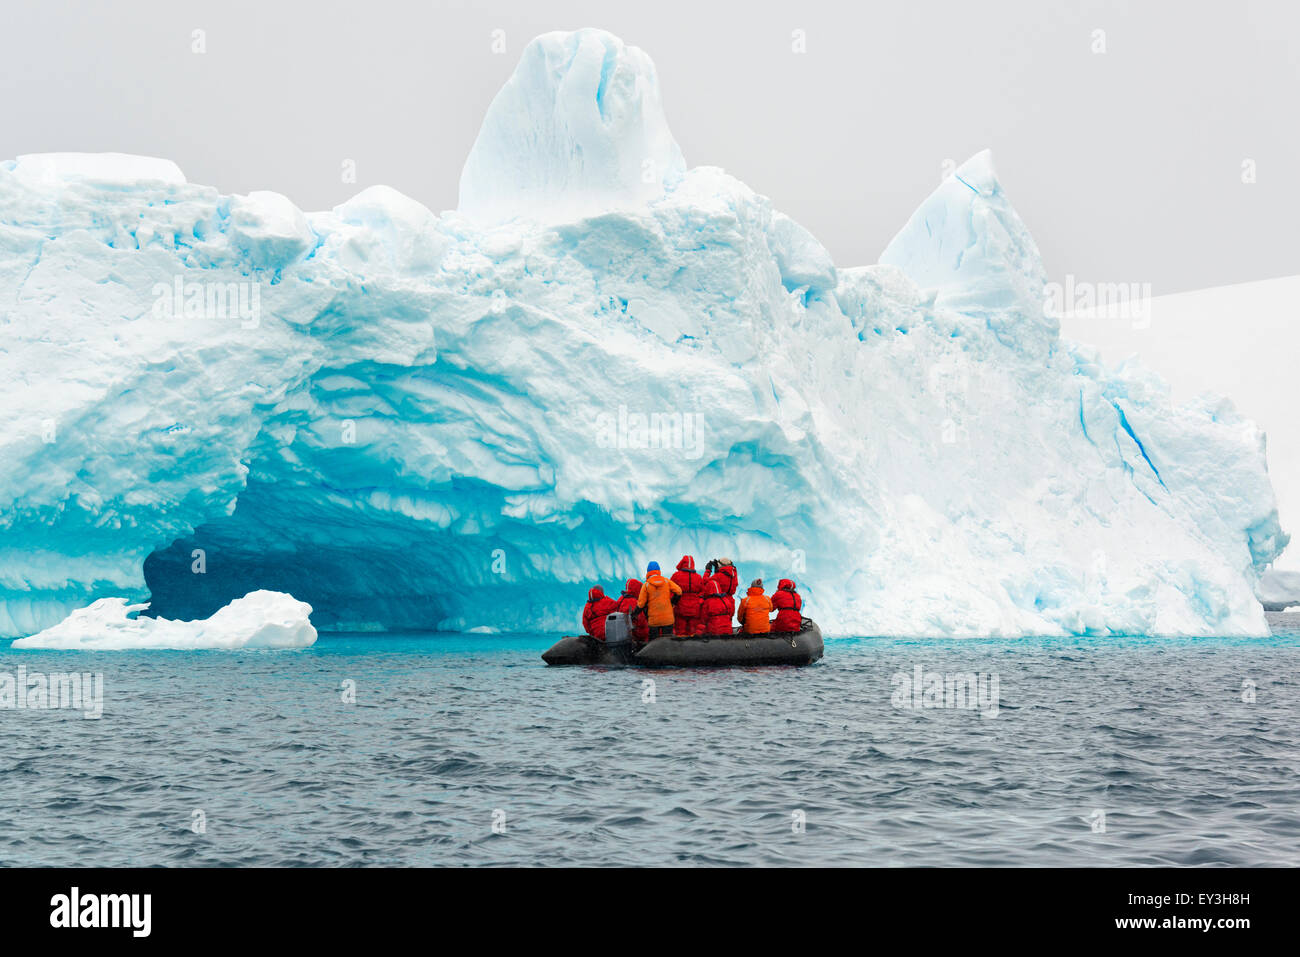 Group of people crossing the ocean in the Antarctic in a rubber boat, icebergs in the background. Stock Photo